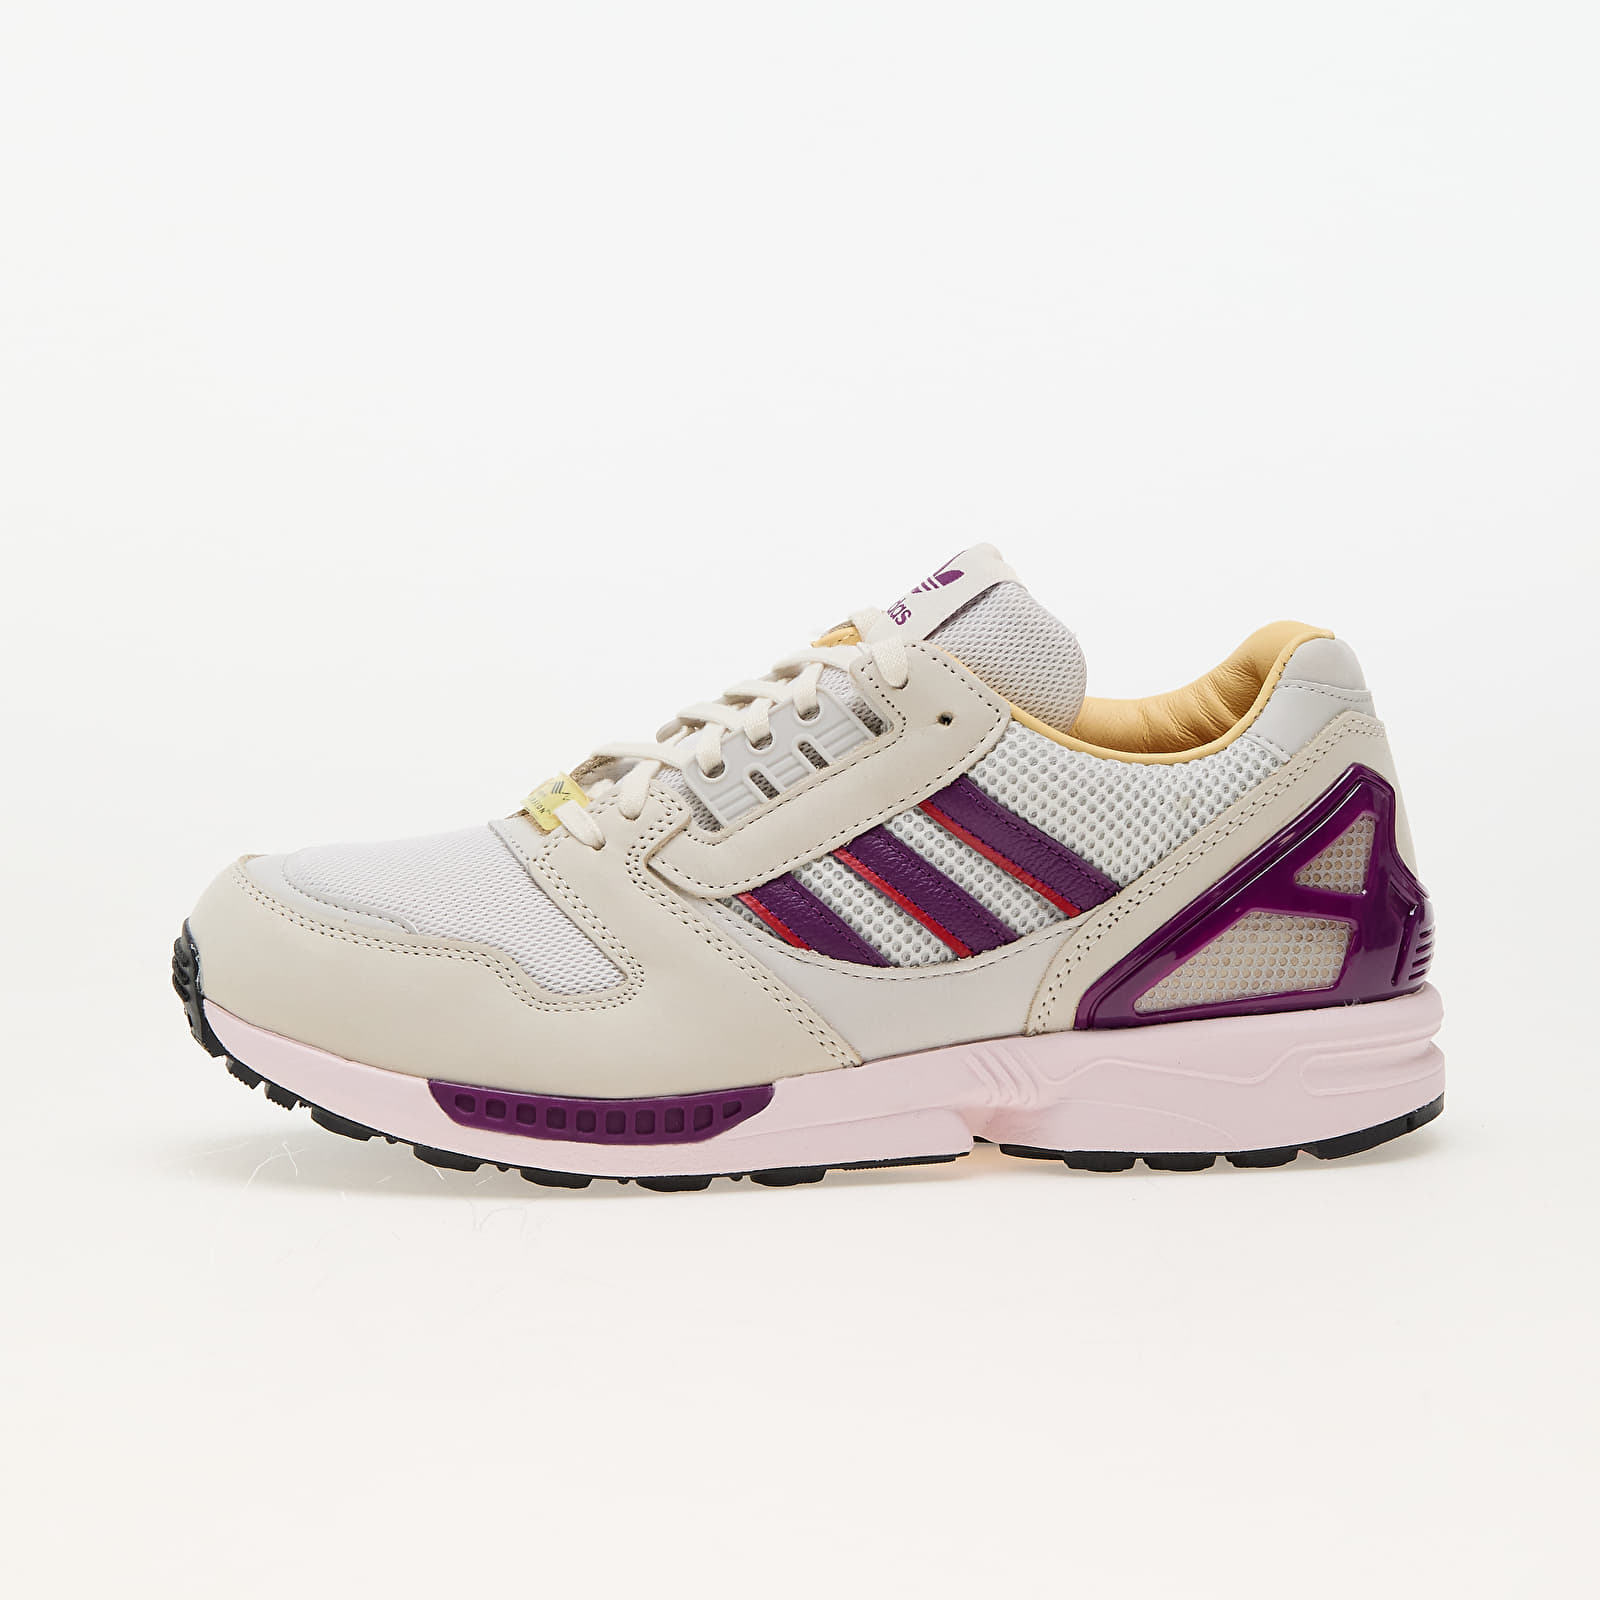 Baskets et chaussures pour hommes adidas ZX 8000 Crystal White/ Glory Purple/ Orange Tint